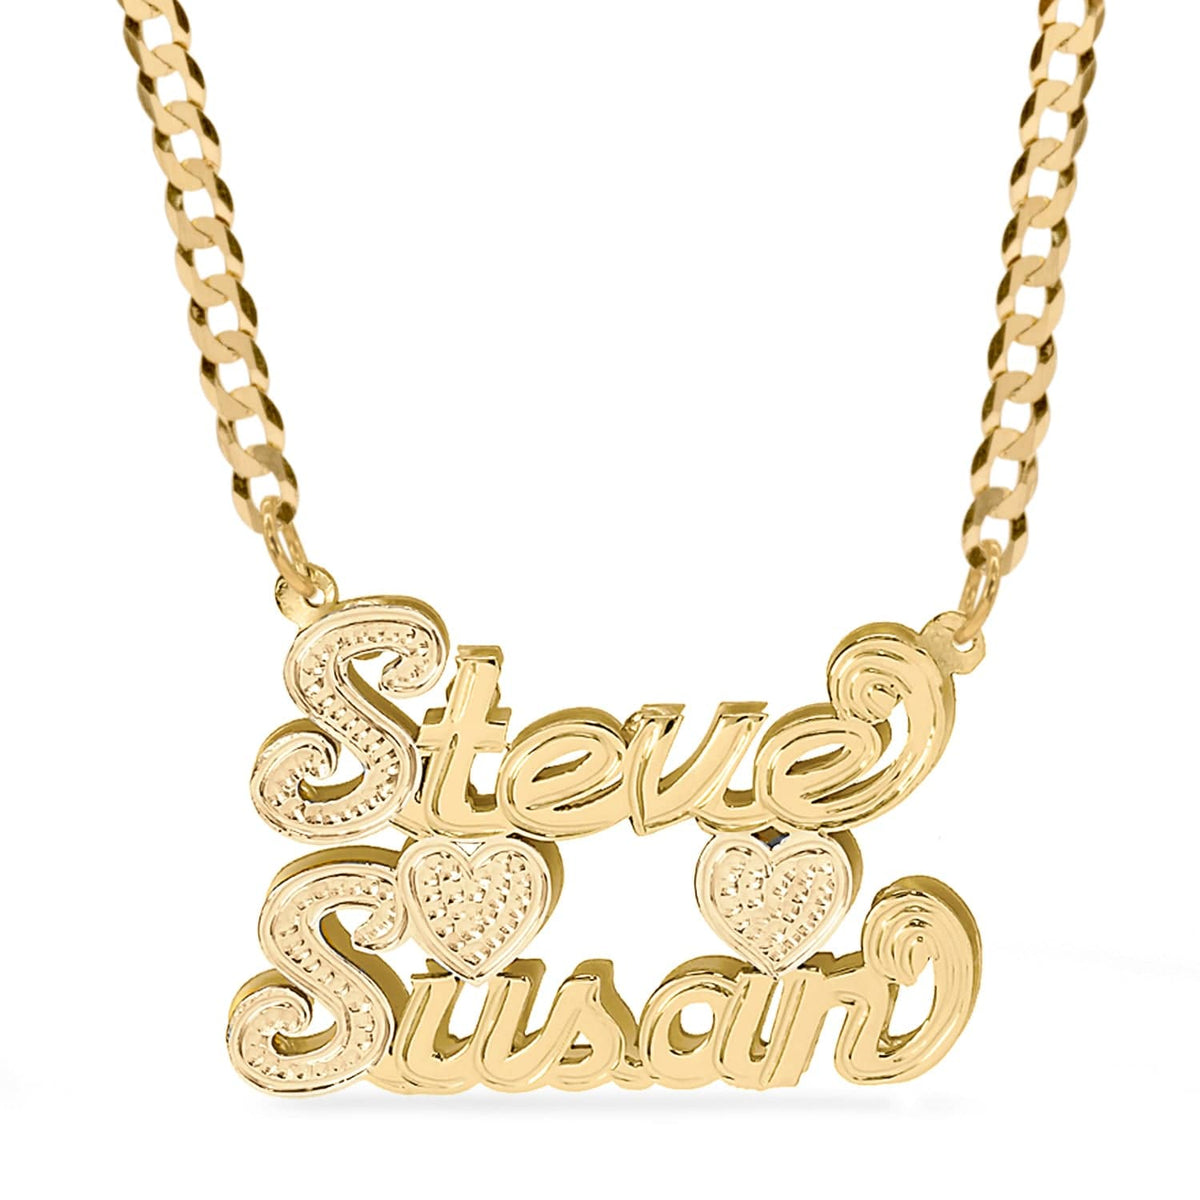 14k Gold over Sterling Silver / Cuban Chain Double Plated Name Necklace - Couples - Best Friends